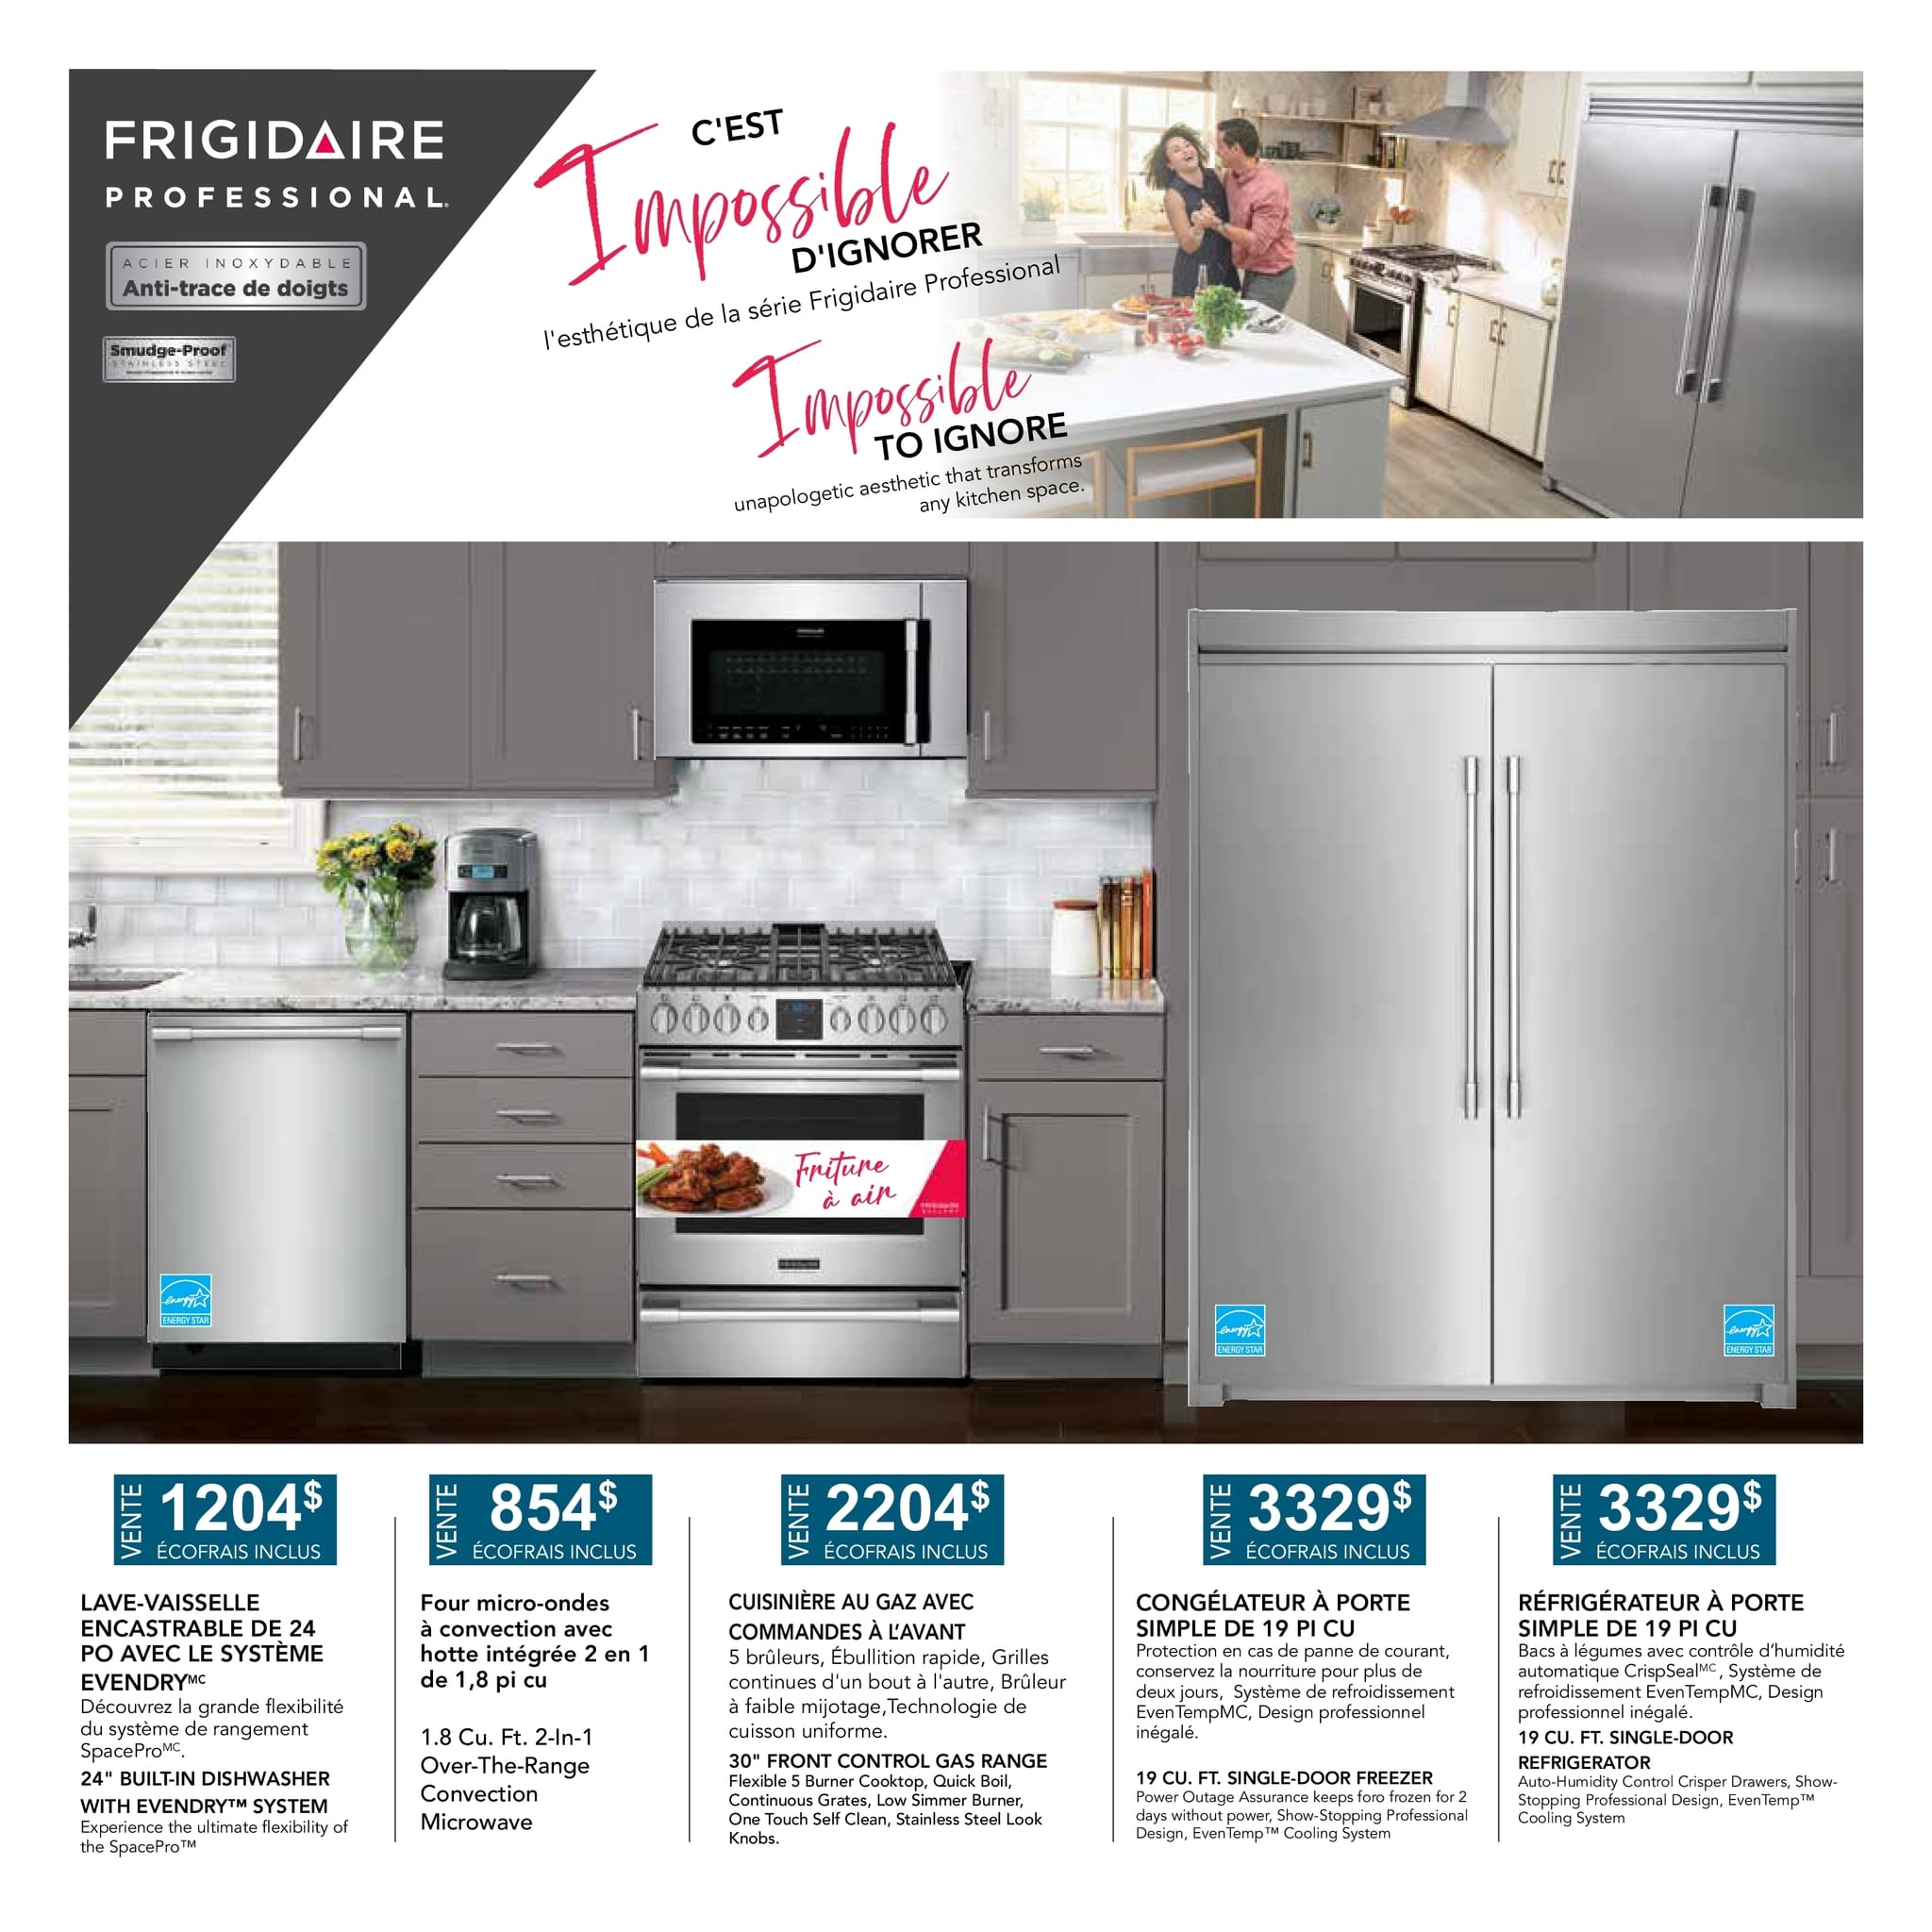 Circulaire Meubles Marchand - Frigidaire - Page 3